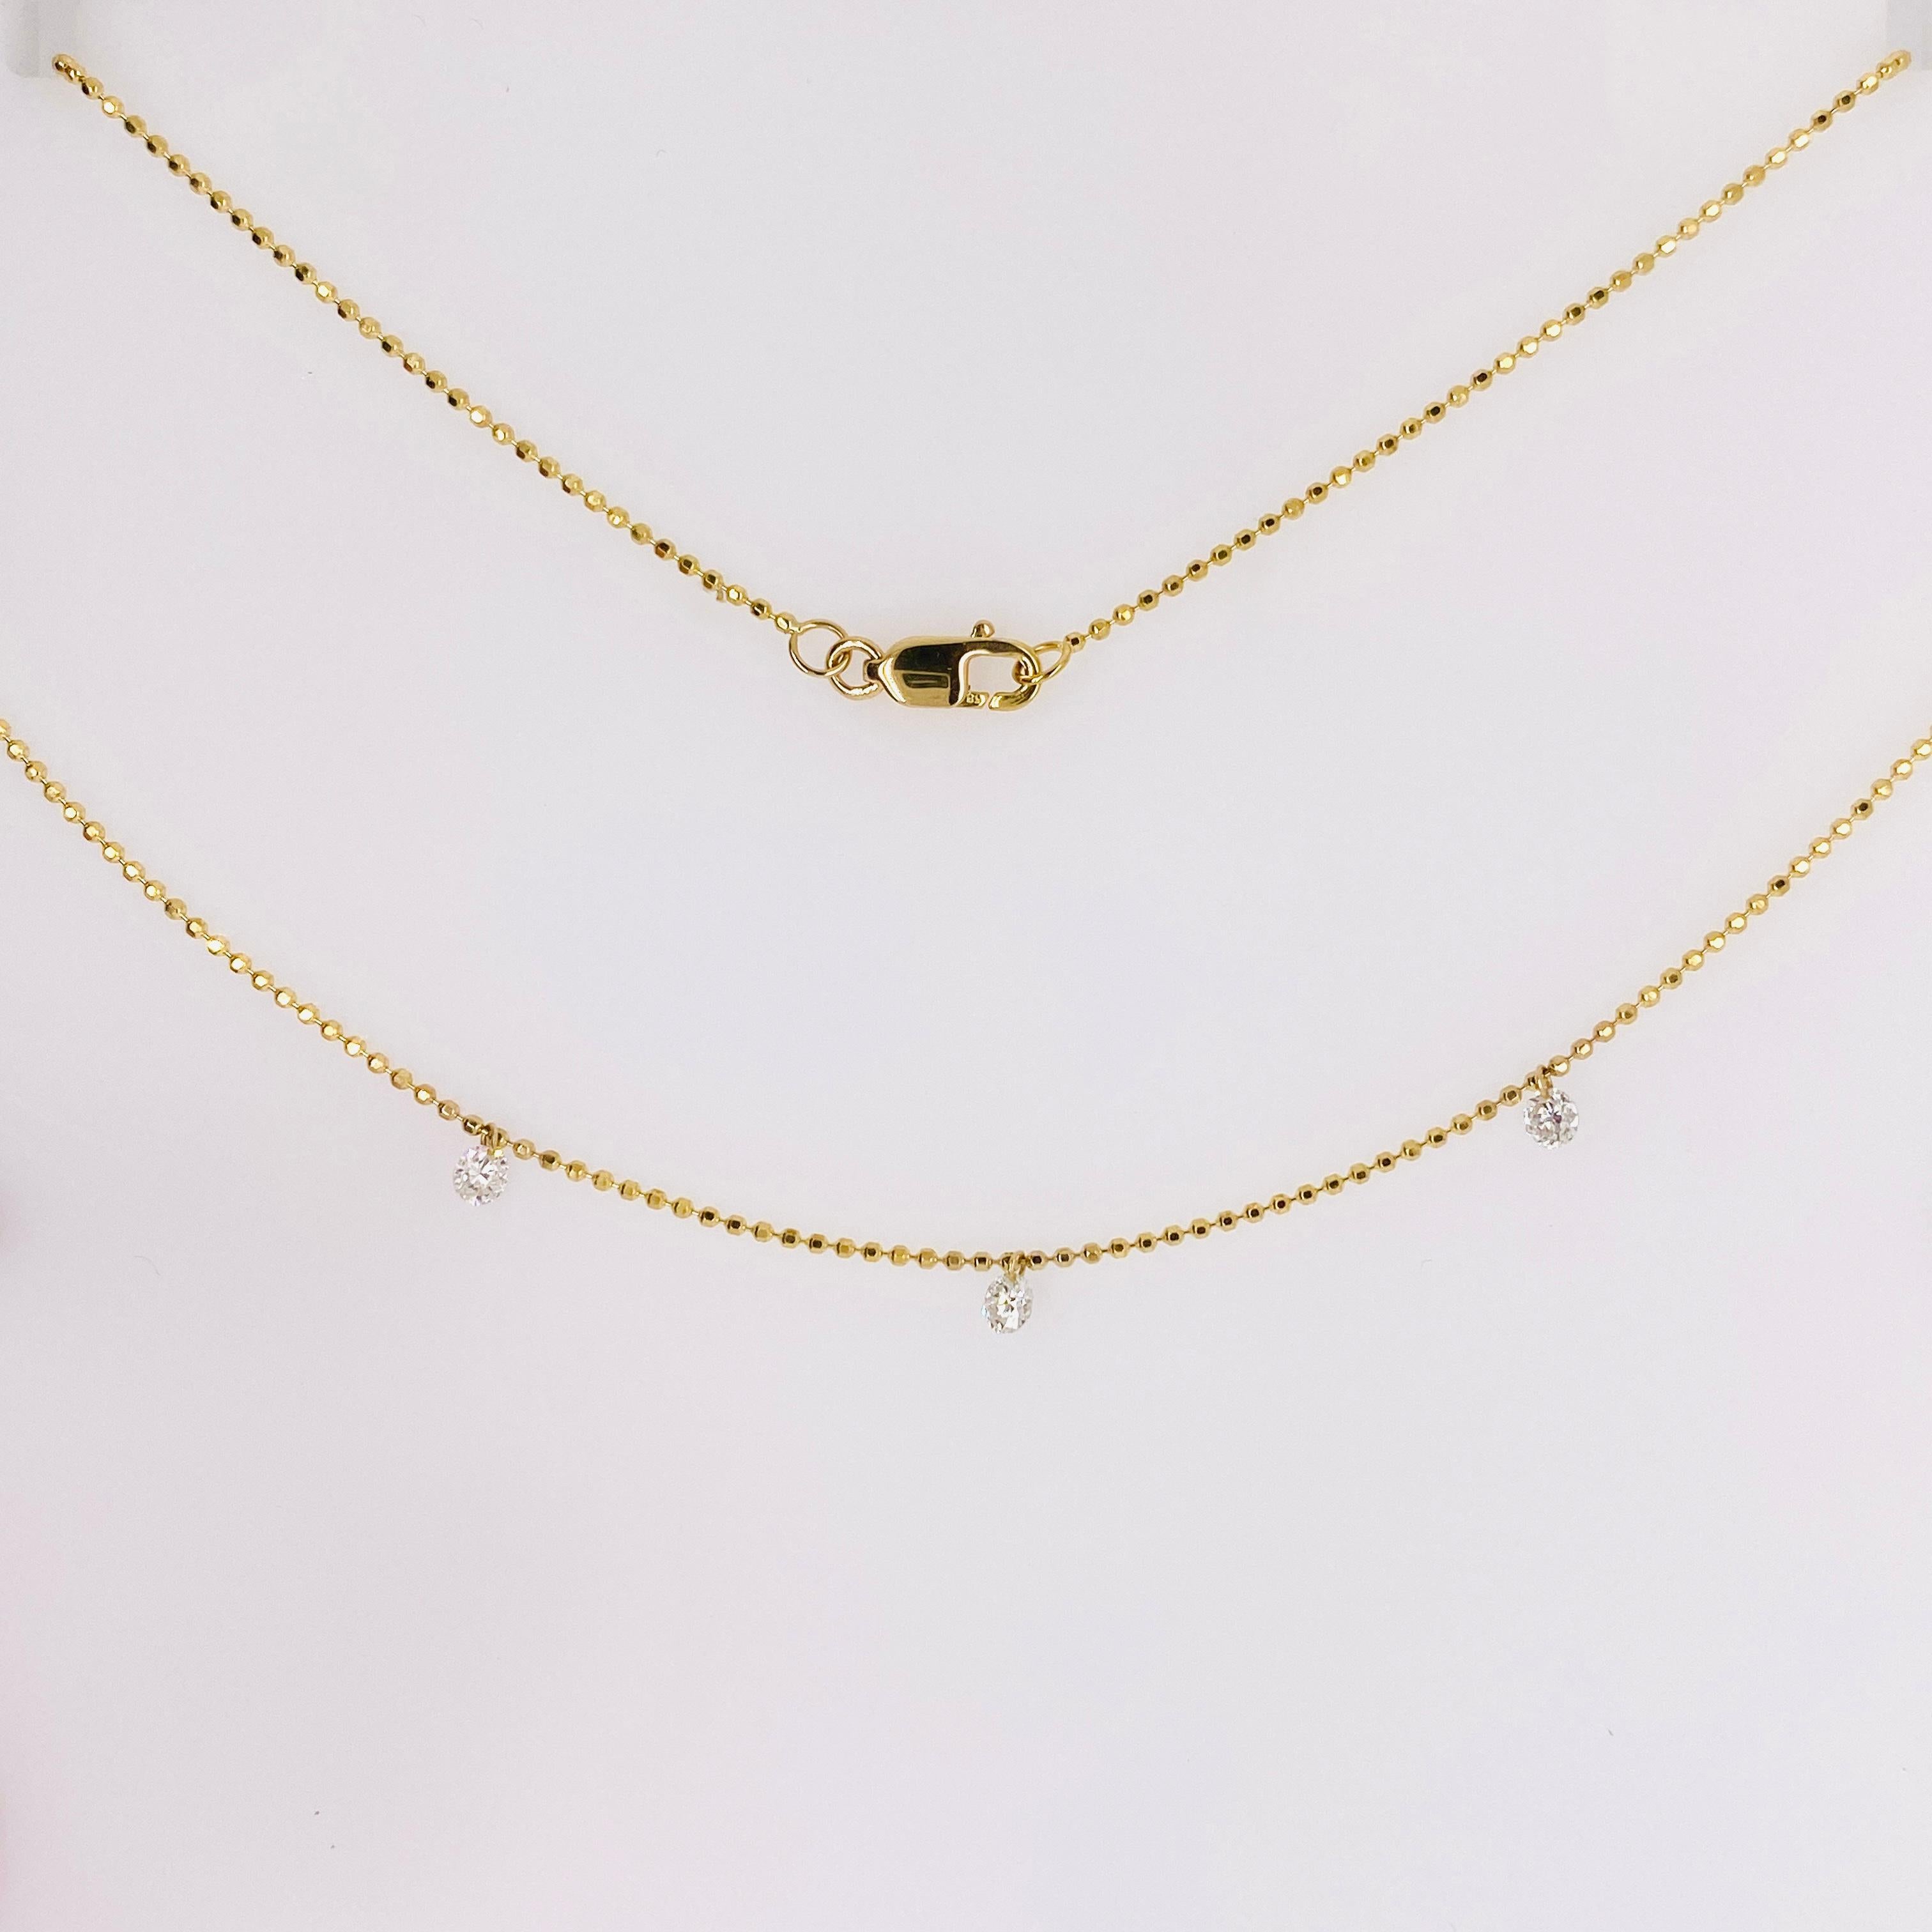 You will stun with the sleek elegance of this necklace! The dashing diamond look is a minimalist style with lots of sparkle as the three diamonds dangle freely to catch any light around! This great staple piece will suit any occasion whether you're